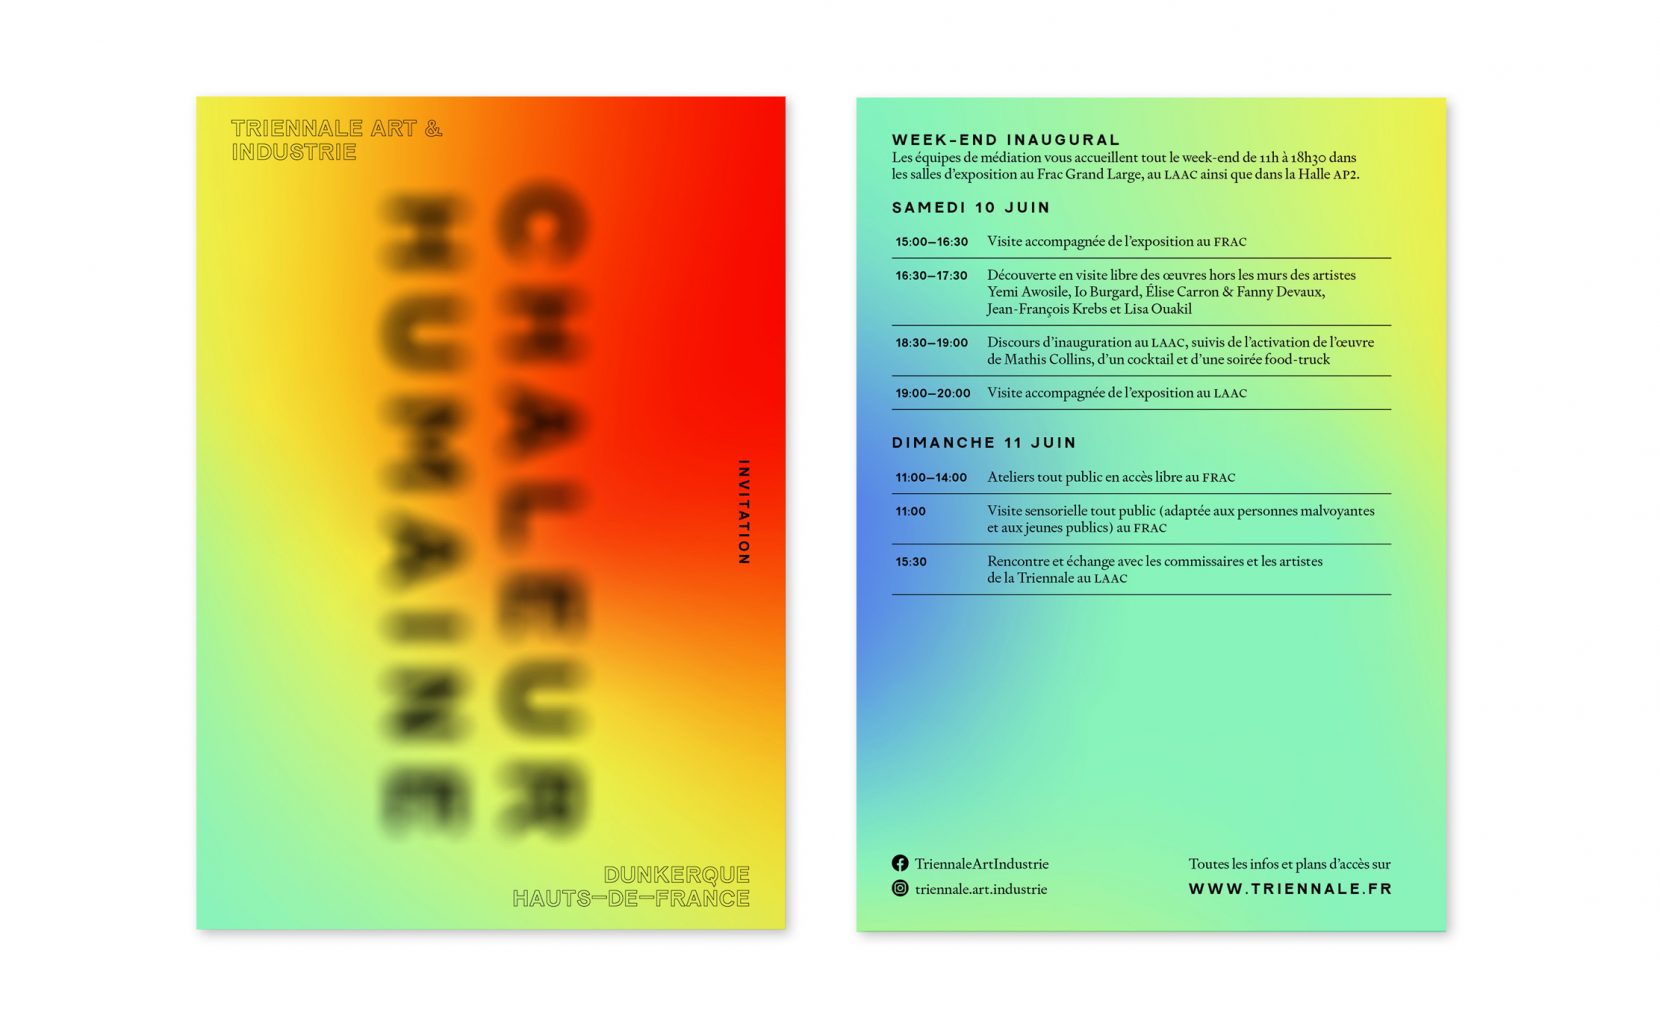 Invitation Chaleur Humaine, Triennale Art & Industrie, Dunkerque, North of France, designed by In the shade of a tree studio, founded by Sophie Demay and Maël Fournier Comte, joined by Jimmy Cintero.